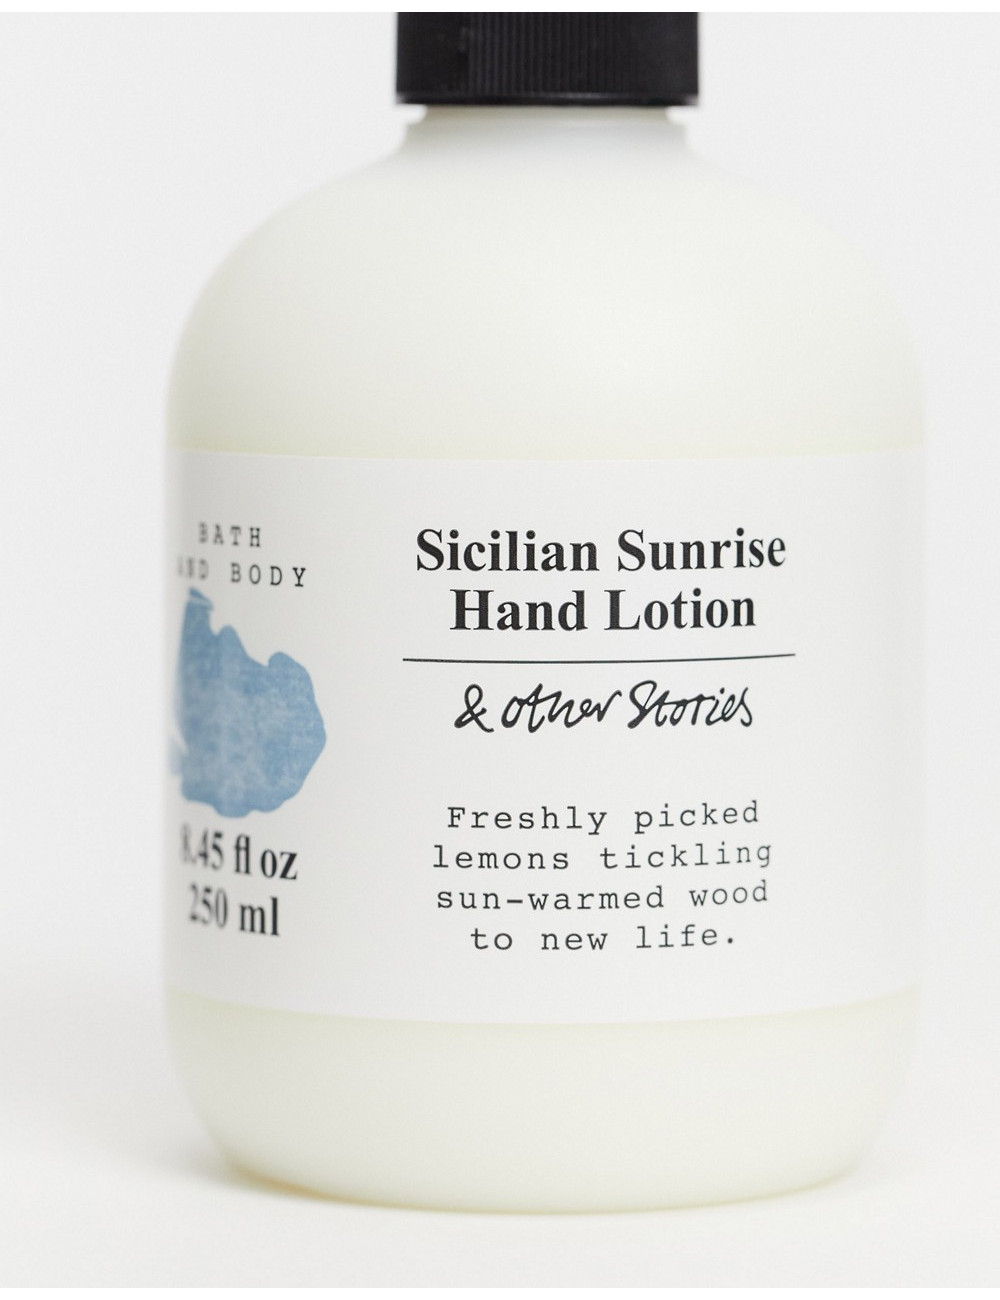 & Other Stories hand lotion...